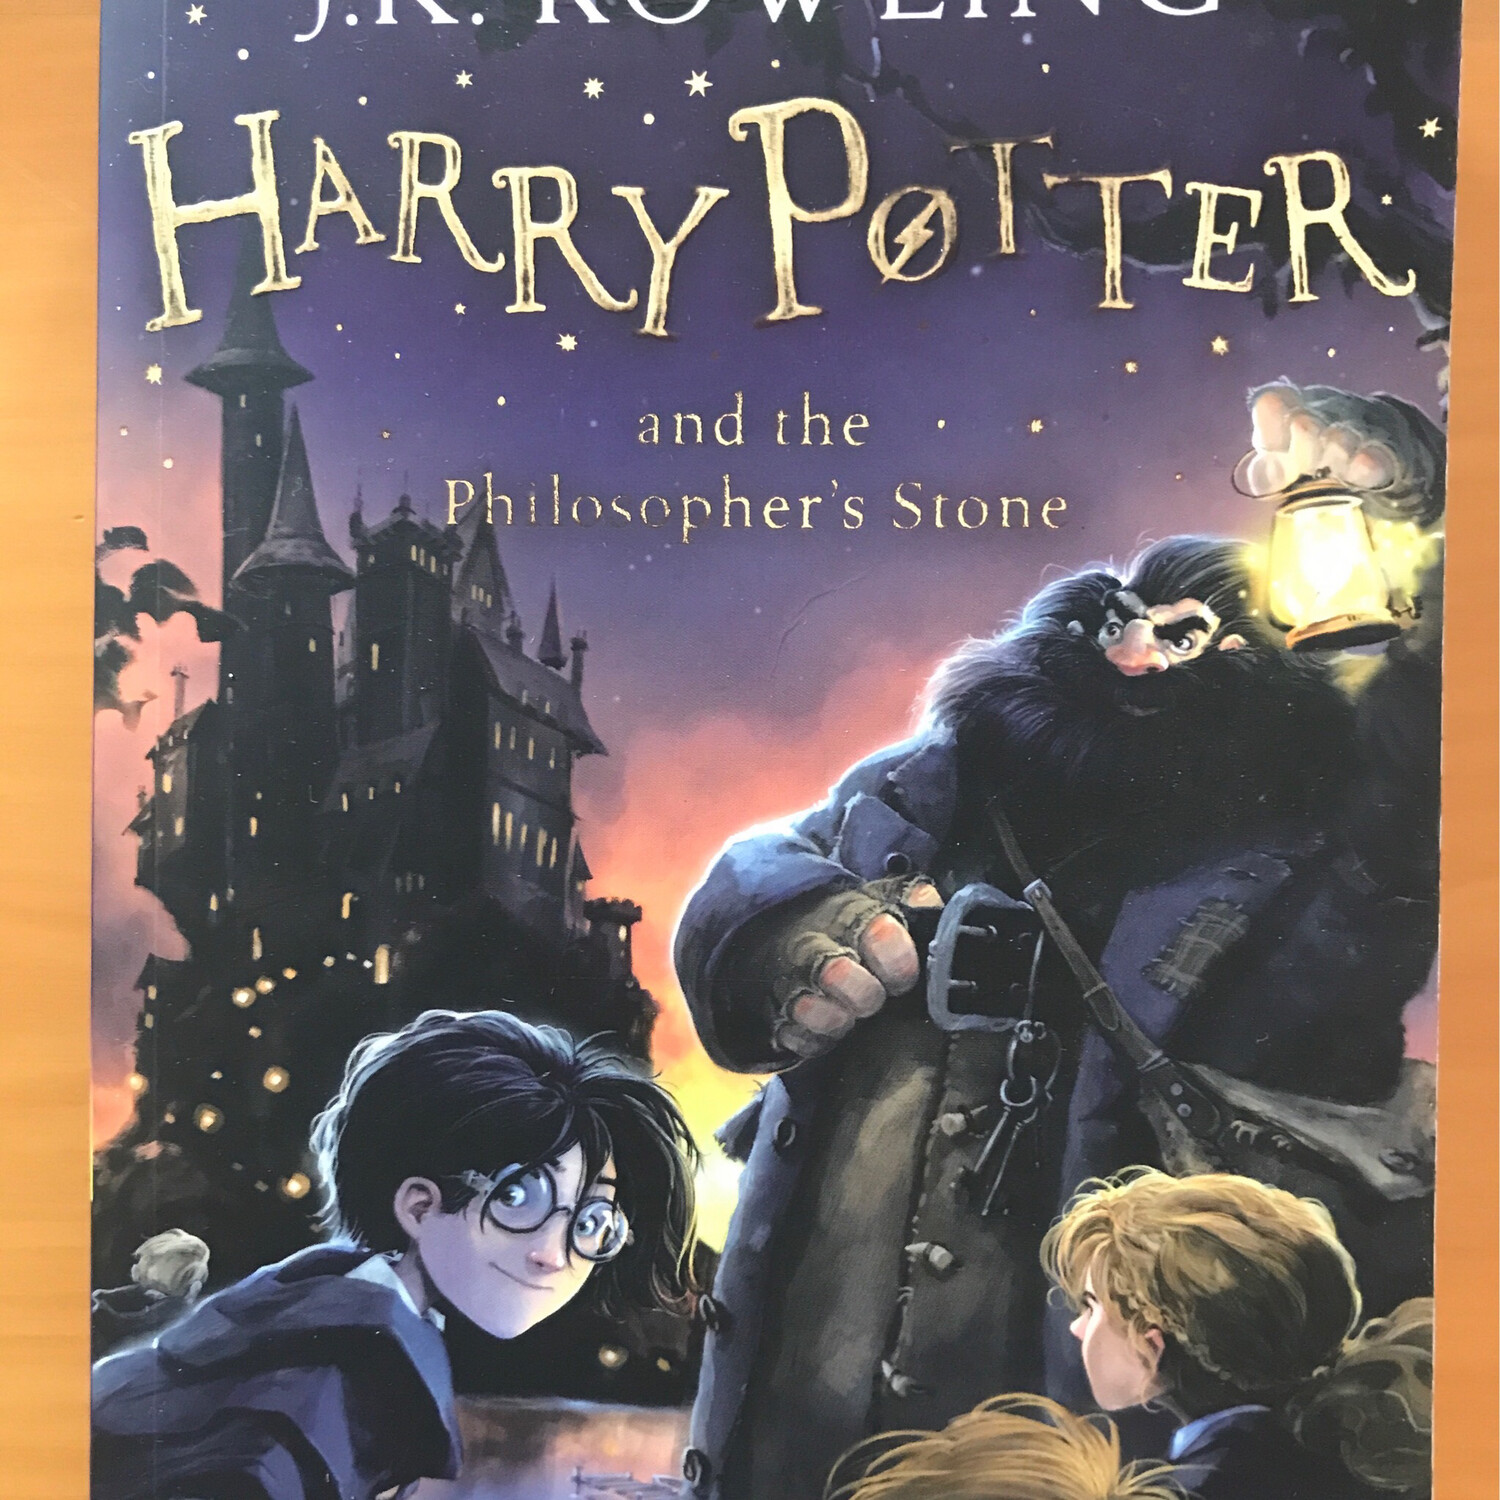 Harry Potter And The Philosopher’s Stone, J. K. Rowling